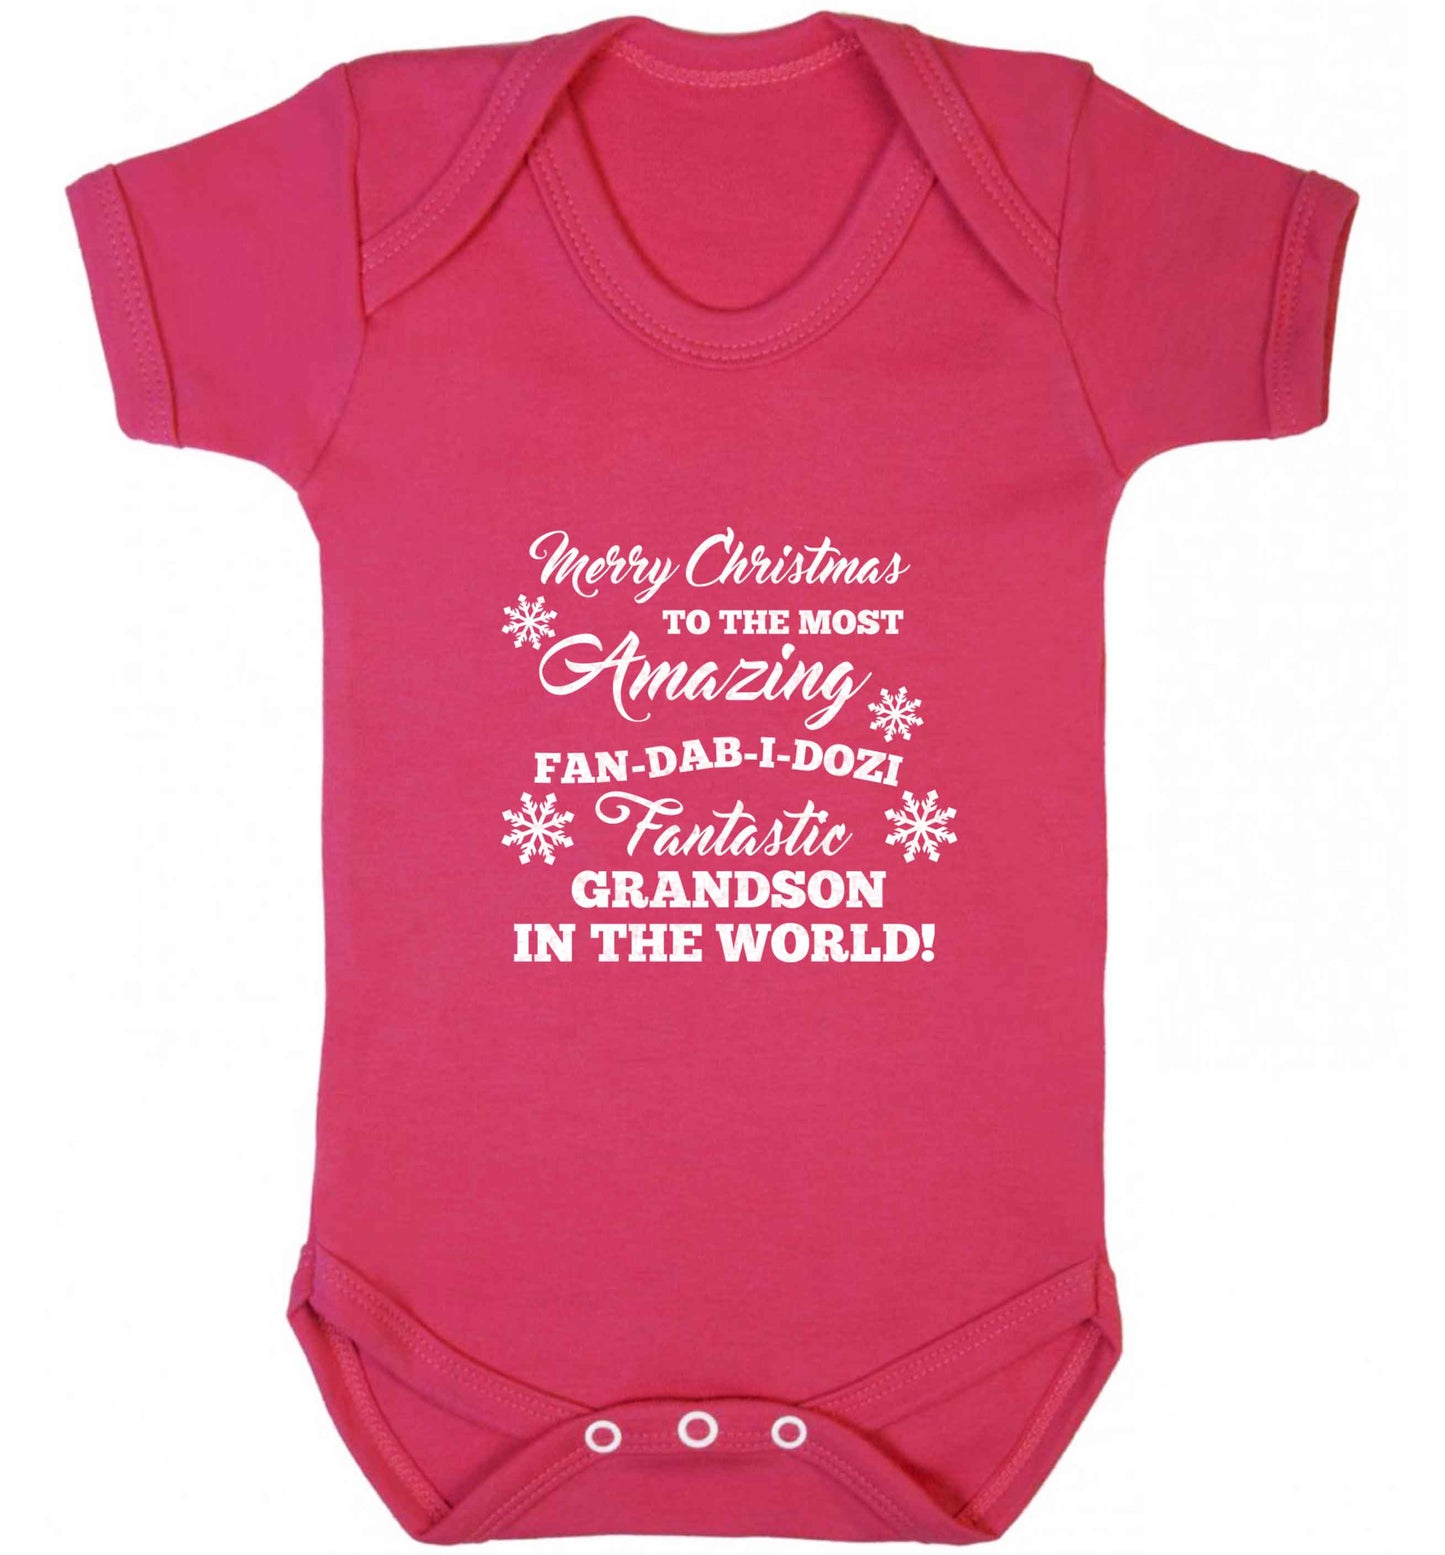 Merry Christmas to the most amazing fan-dab-i-dozi fantasic Grandson in the world baby vest dark pink 18-24 months